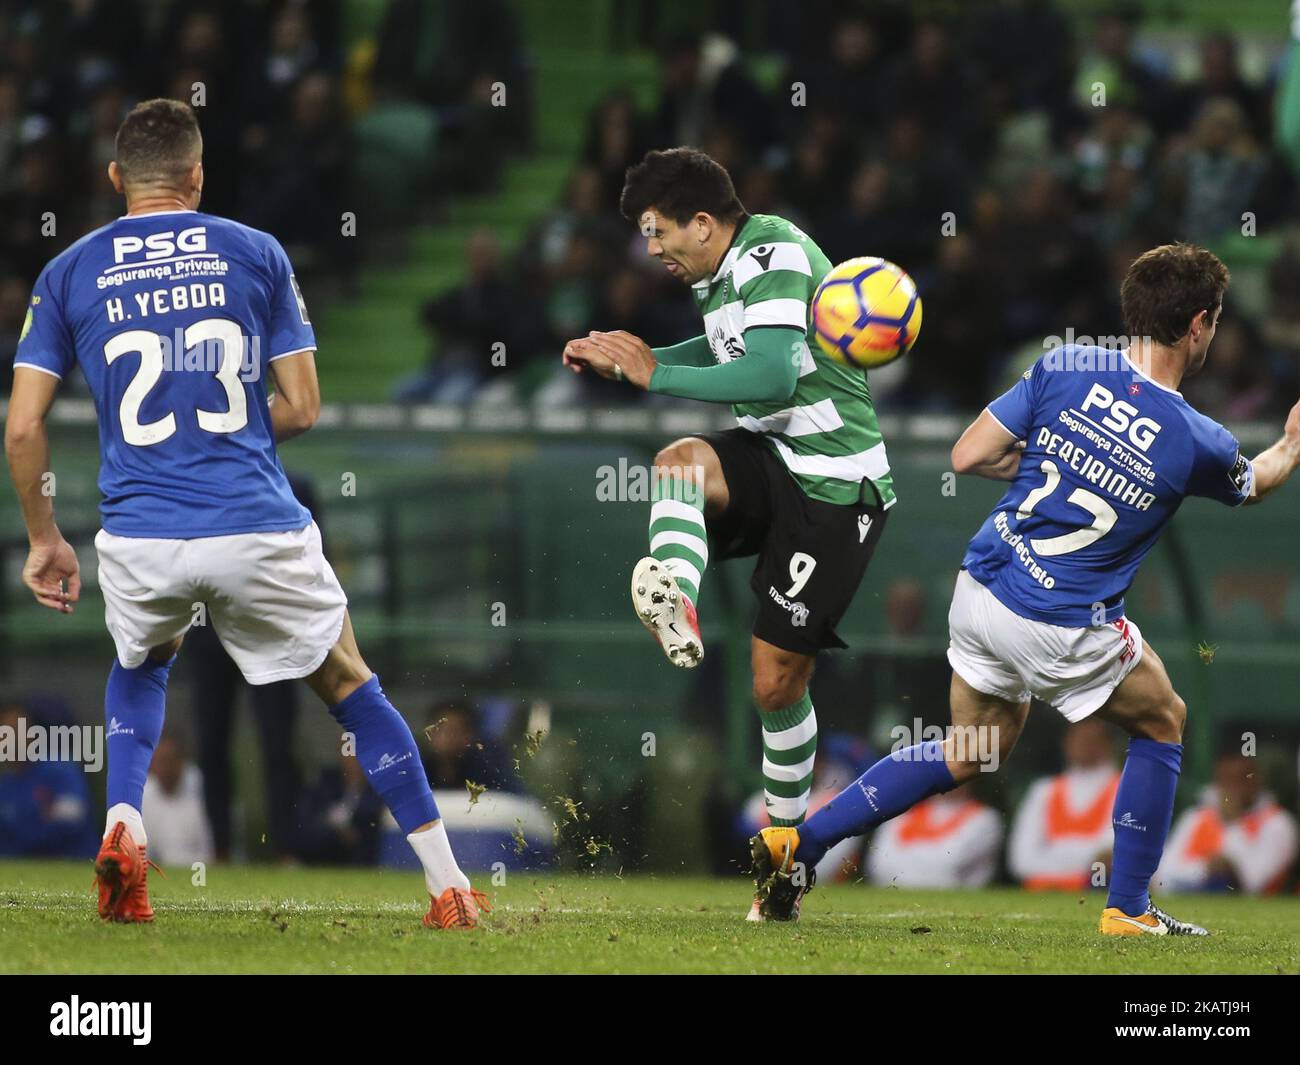 Sporting's midfielder Marcos Acuna (C) vies with Belenenses's midfielder Bruno Pereirinha (R) and Belenenses's midfielder Hassan Yebda during the Portuguese League football match between Sporting CP and CF Belenenses at Jose Alvalade Stadium in Lisbon on December 1, 2017. (Photo by Carlos Costa/NurPhoto) Stock Photo